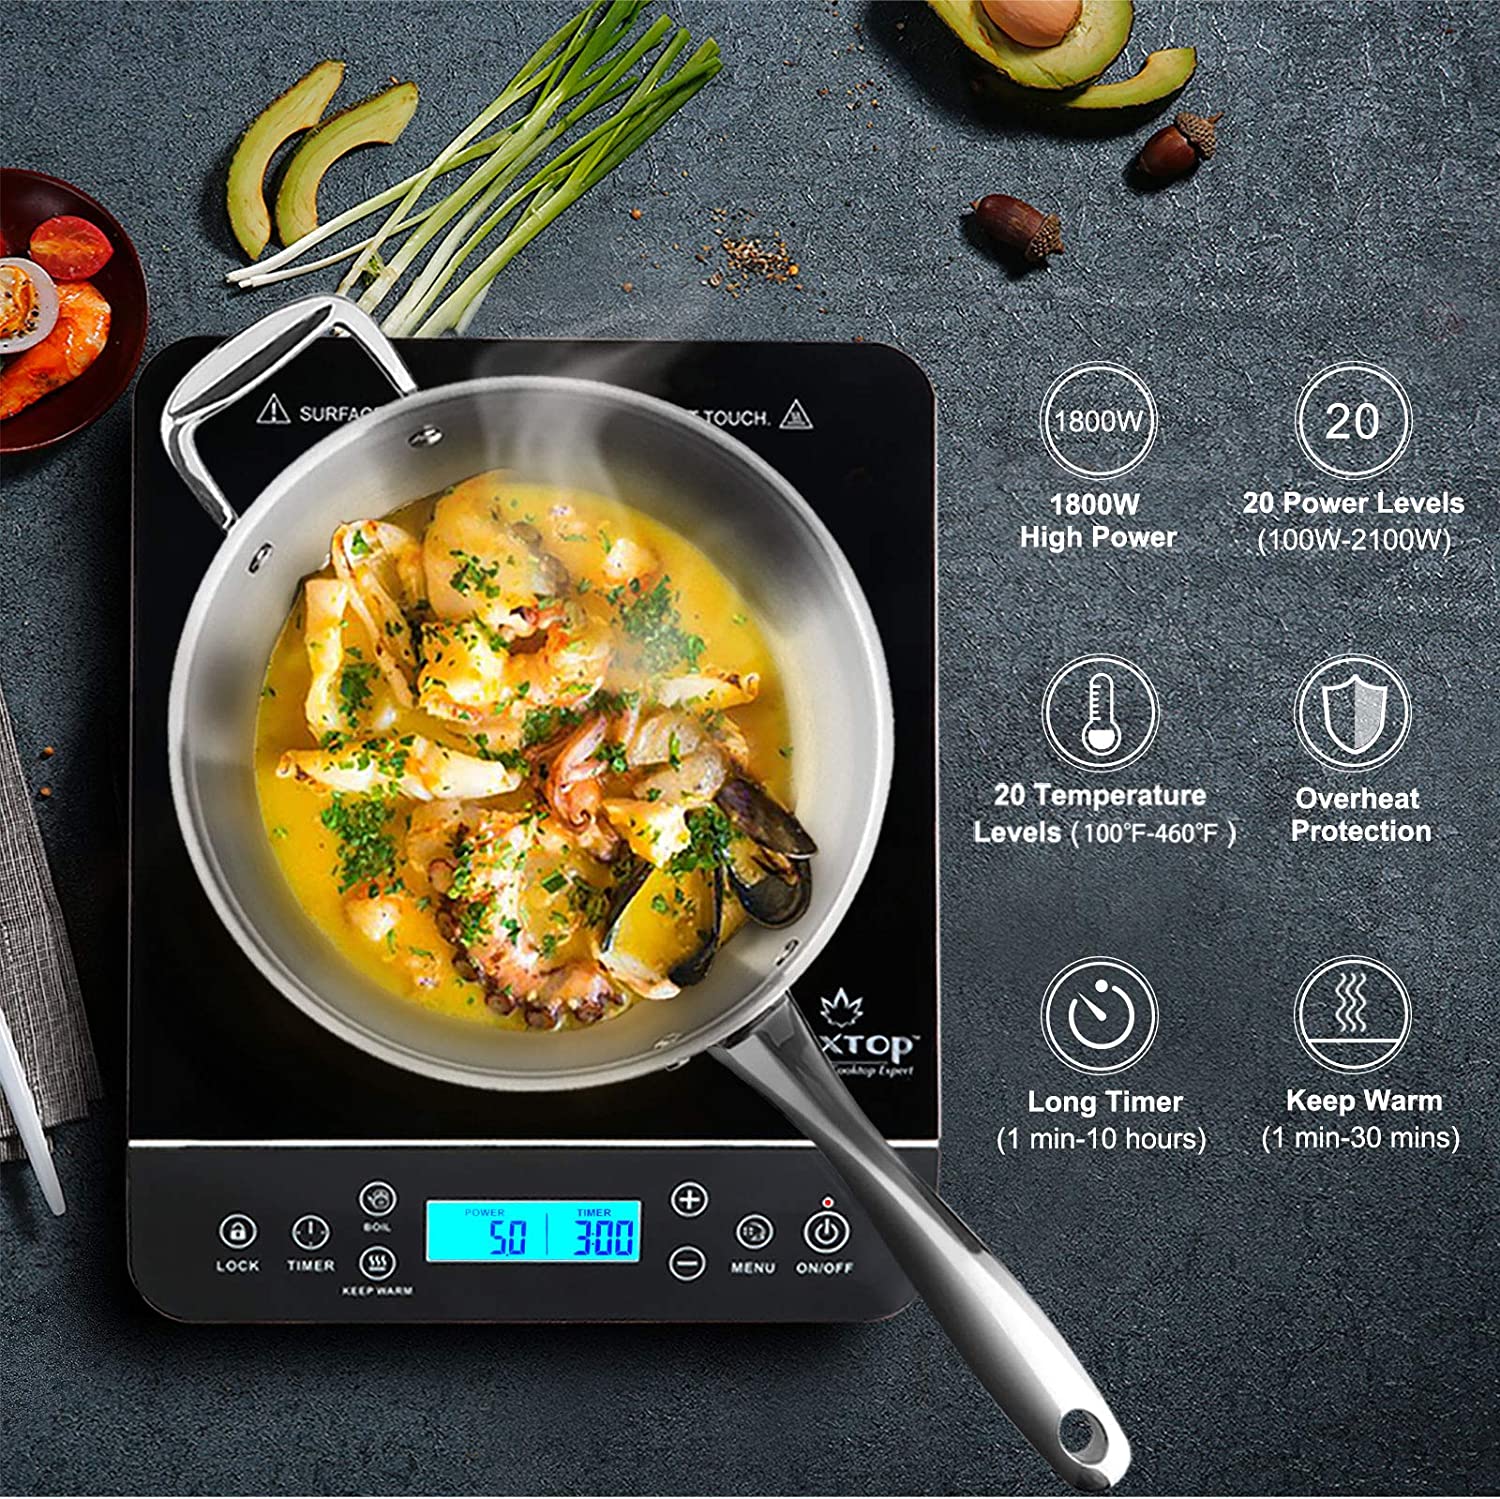 Duxtop 1800W Portable Induction Cooktop 2 Burner, Built-In Countertop Burners with Adjustable Temperature Control, Sensor Touch Induction Burner